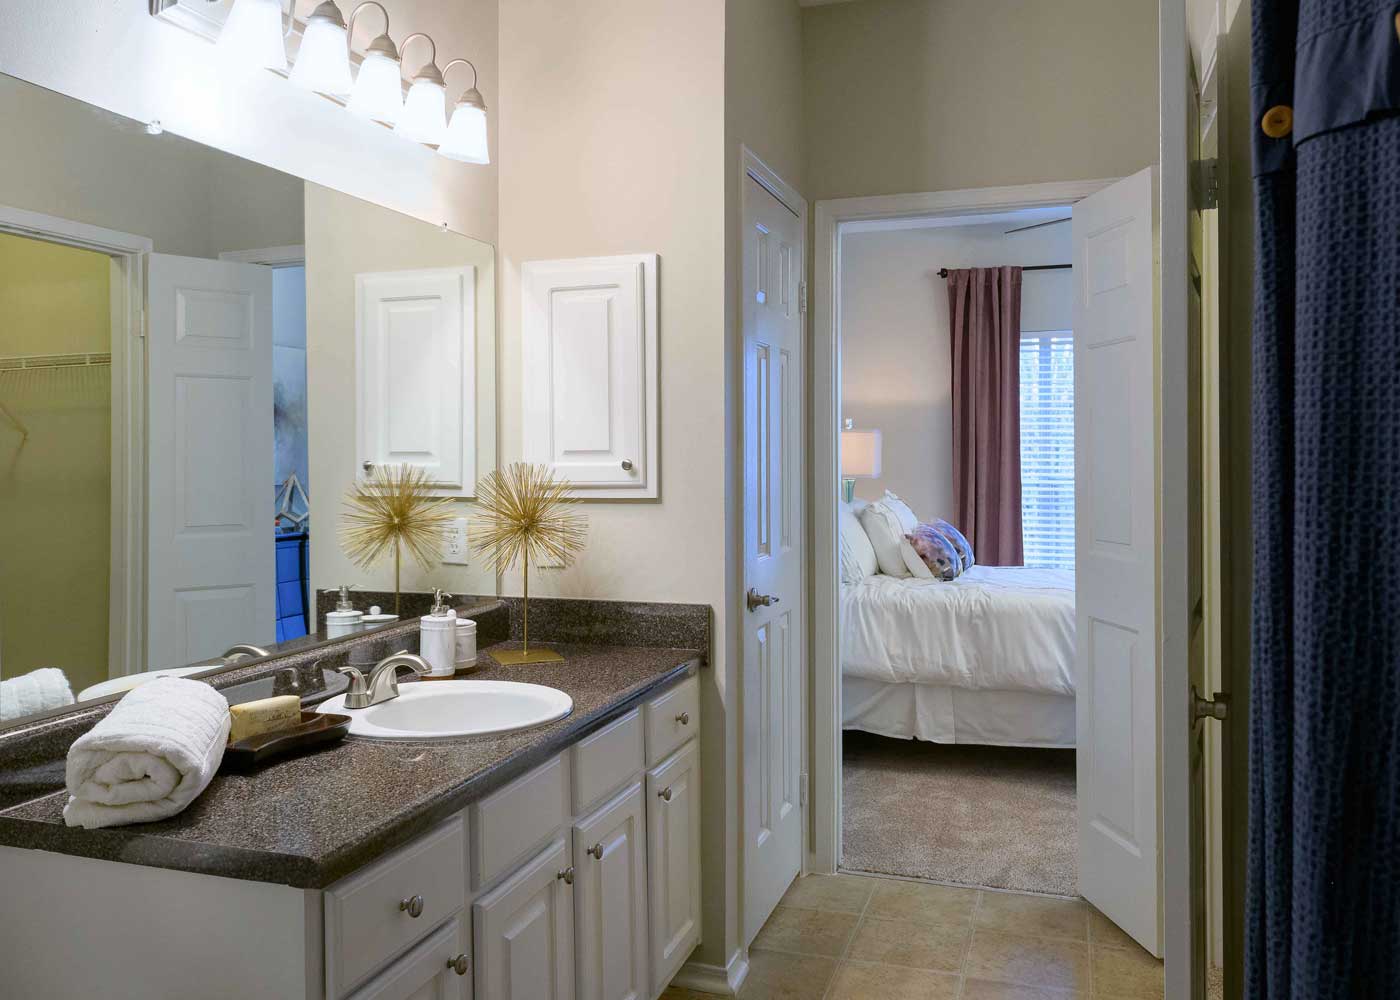 Refined Bathrooms at Windward Place Apartments 